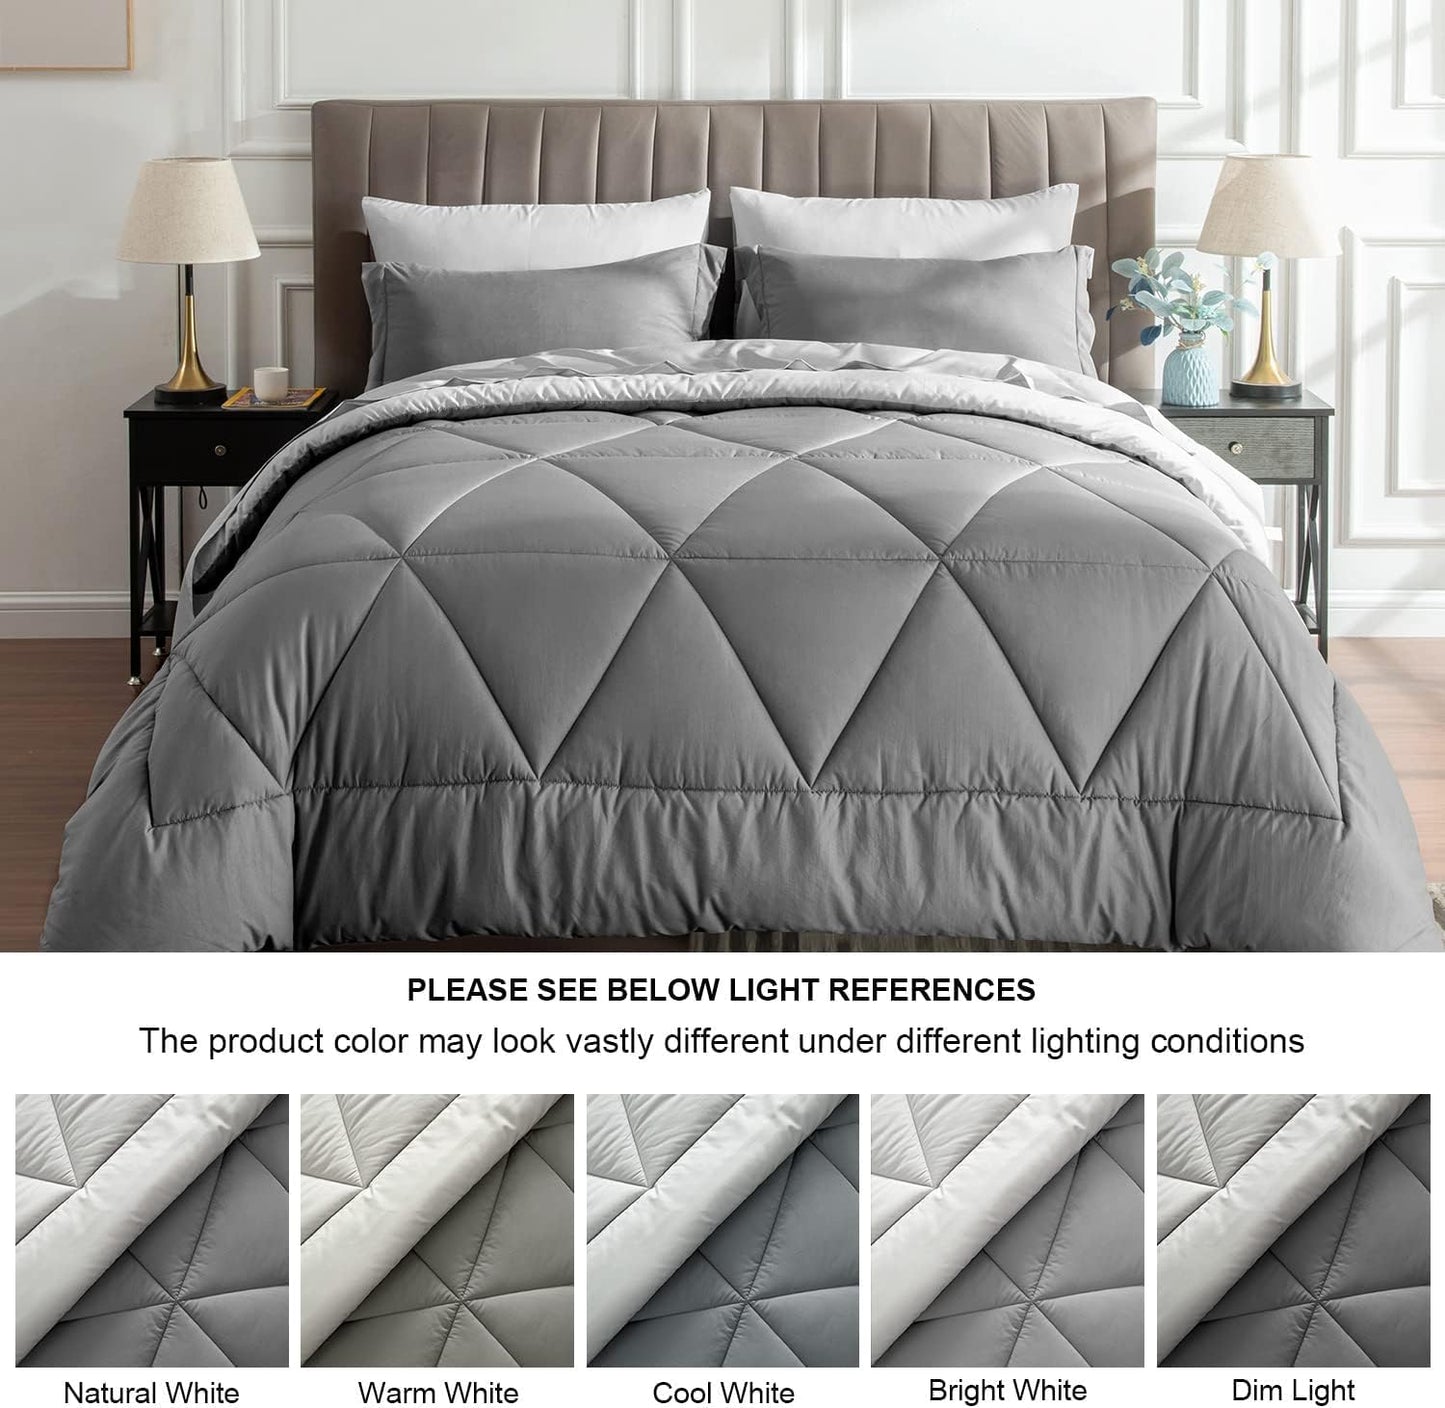 BEDELITE Twin XL Comforter Set 5 Pieces Bed in A Bag - Soft Microfiber Reversible Twin Extra Long Grey Bed Set with Comforters, Sheets, Pillowcase & Sham, Cozy Luxury Bedding Sets for All Season